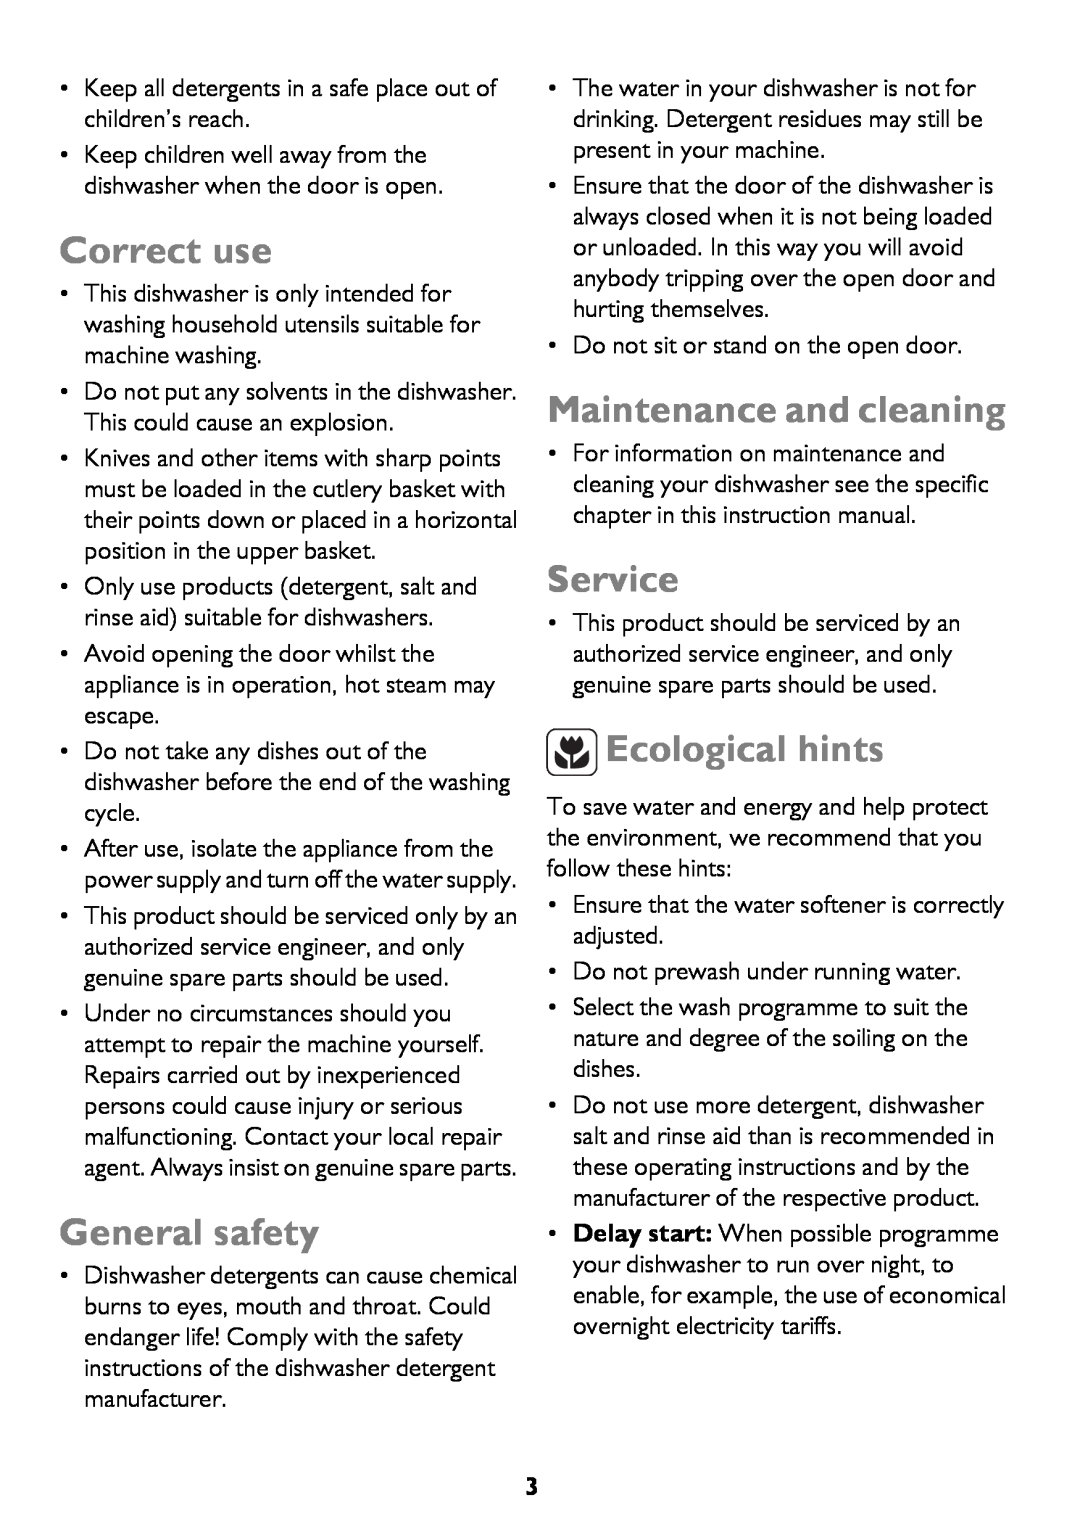 John Lewis JLDWW 1206 instruction manual Correct use, General safety, Maintenance and cleaning, Service, Ecological hints 